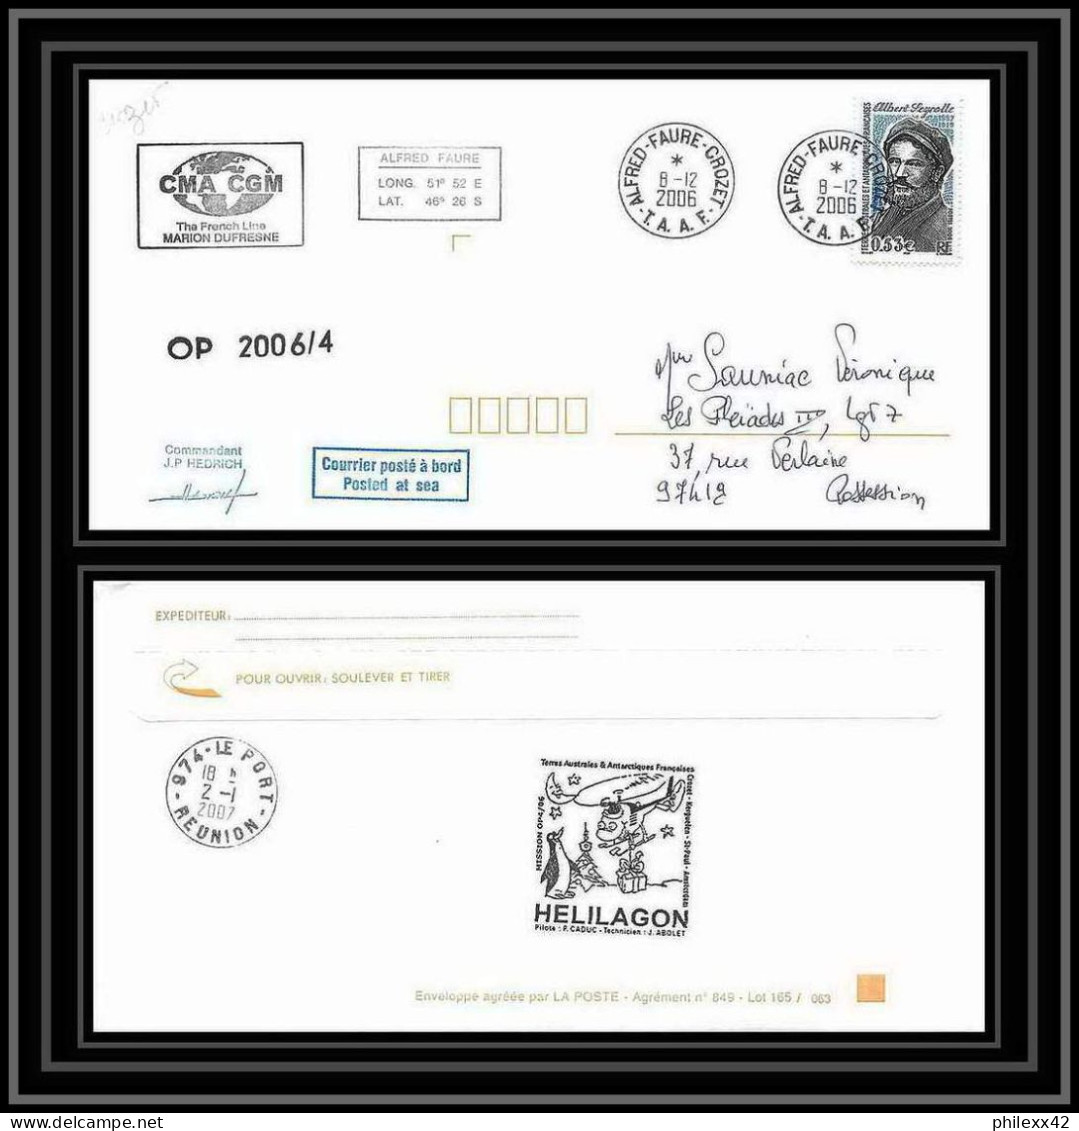 2627 ANTARCTIC Terres Australes TAAF Lettre Cover Dufresne 2 Signé Signed Op 2006/4 Crozet 8/12/2006 N°437 Helilagon - Helicopters